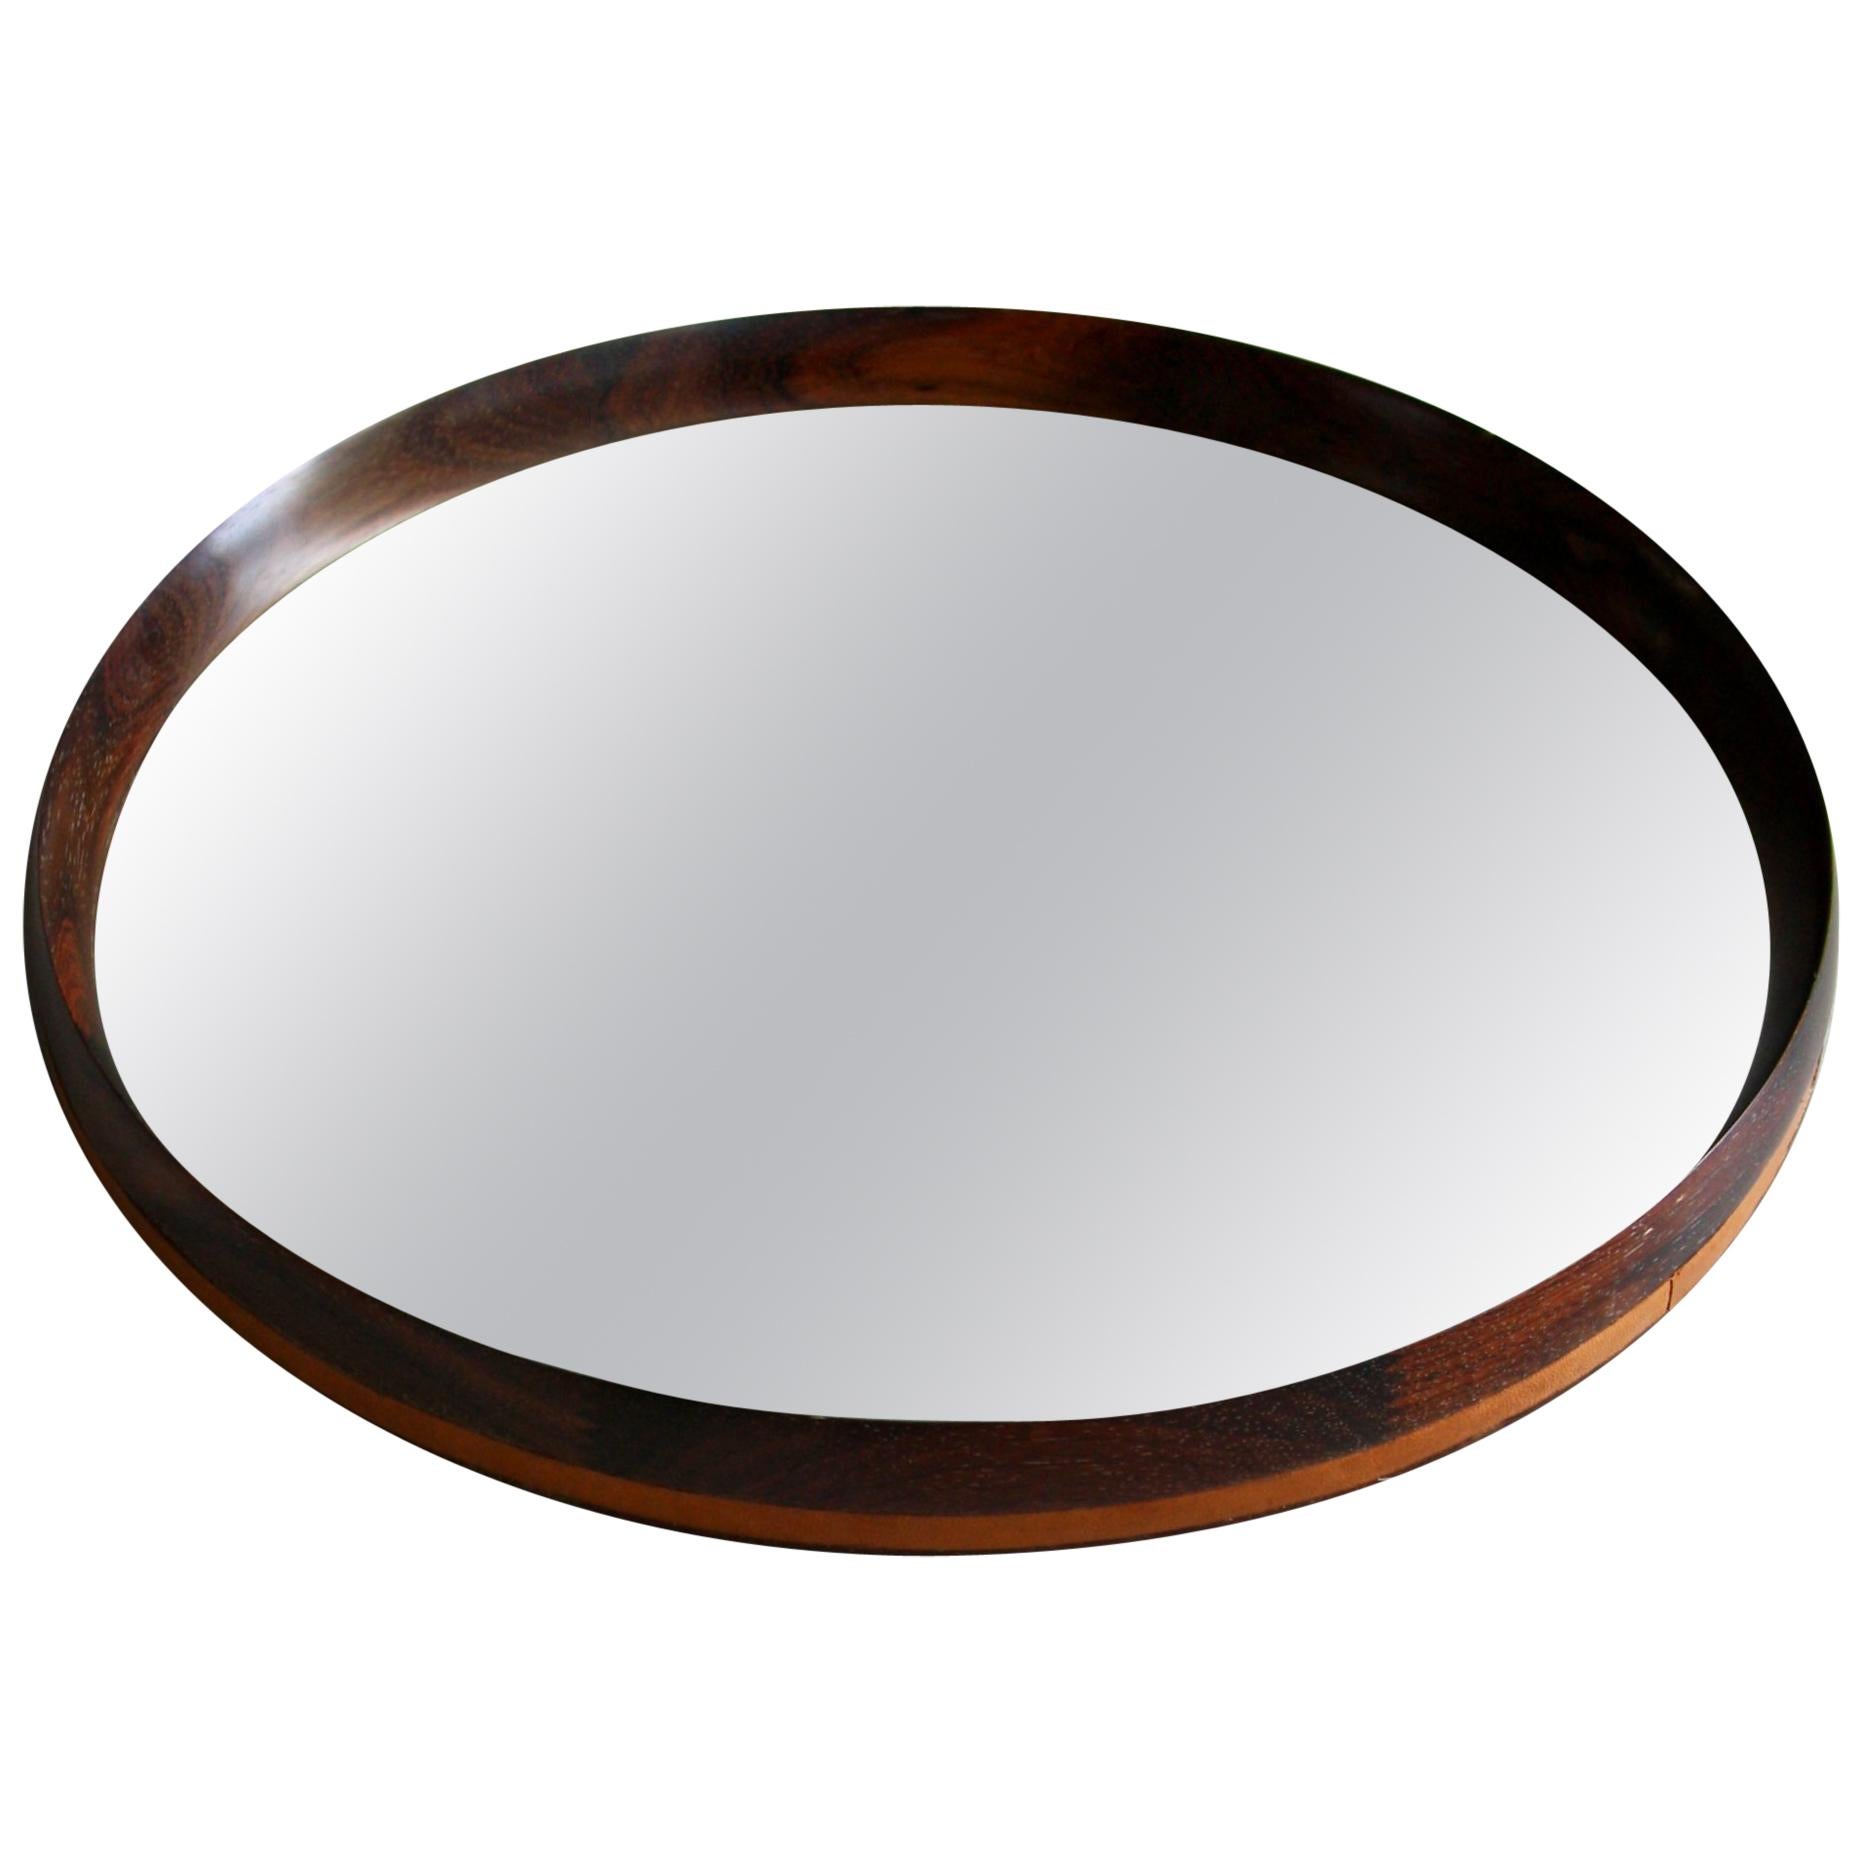 Vintage Rosewood and Leather Mirror, Denmark, 1950s